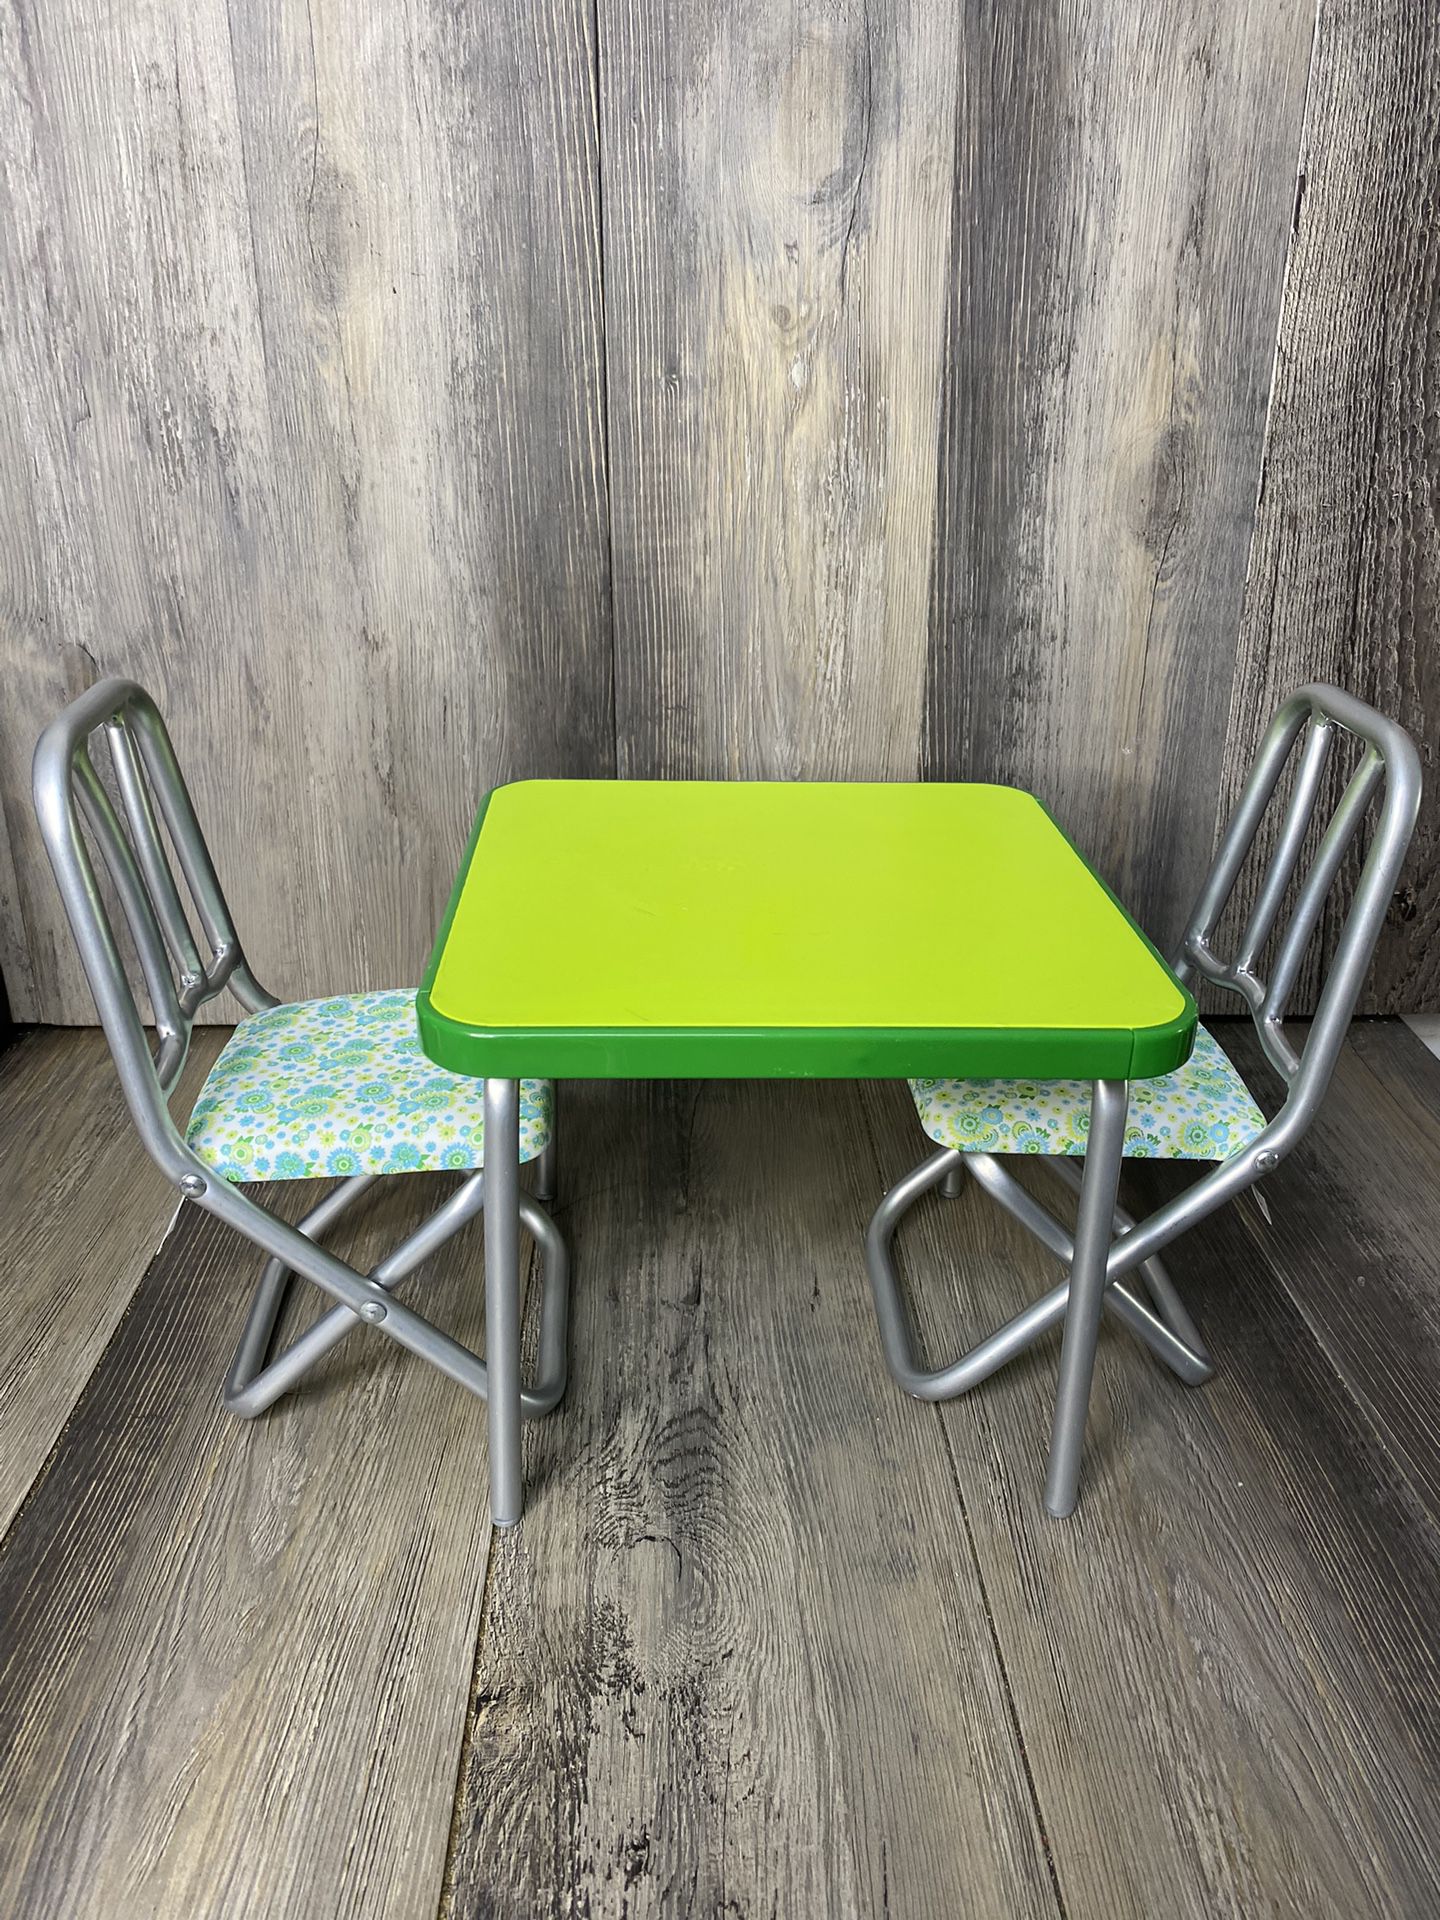 American Girl Doll Melody Metal Kitchen Patio Table and Chairs Retired 2019